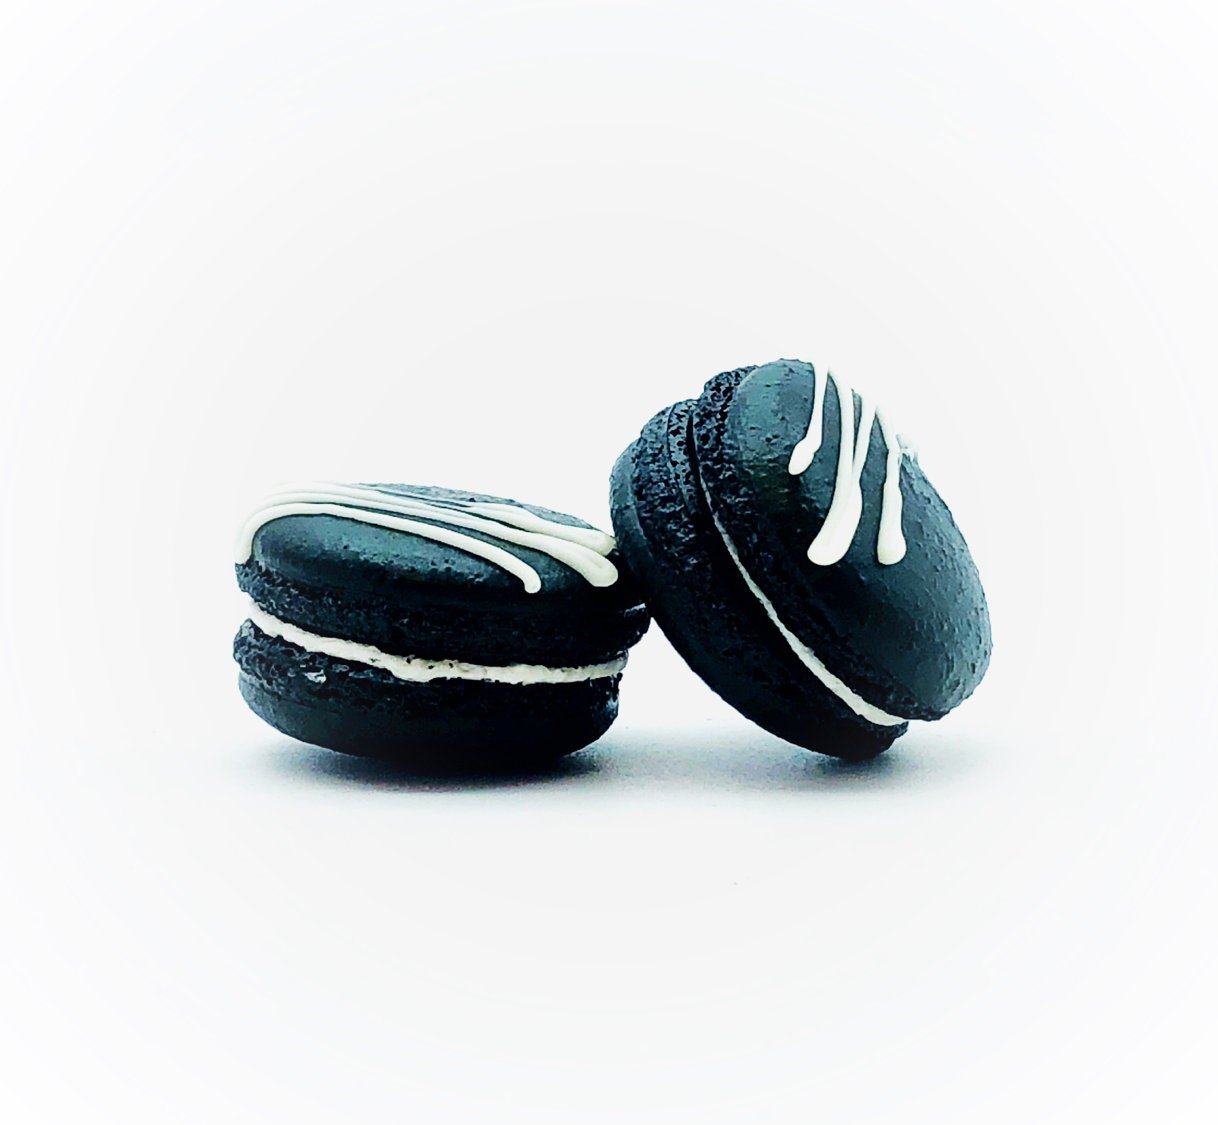 6 Pack Black Velvet French Macarons | Perfect for your next celebratory events. - Macaron Centrale